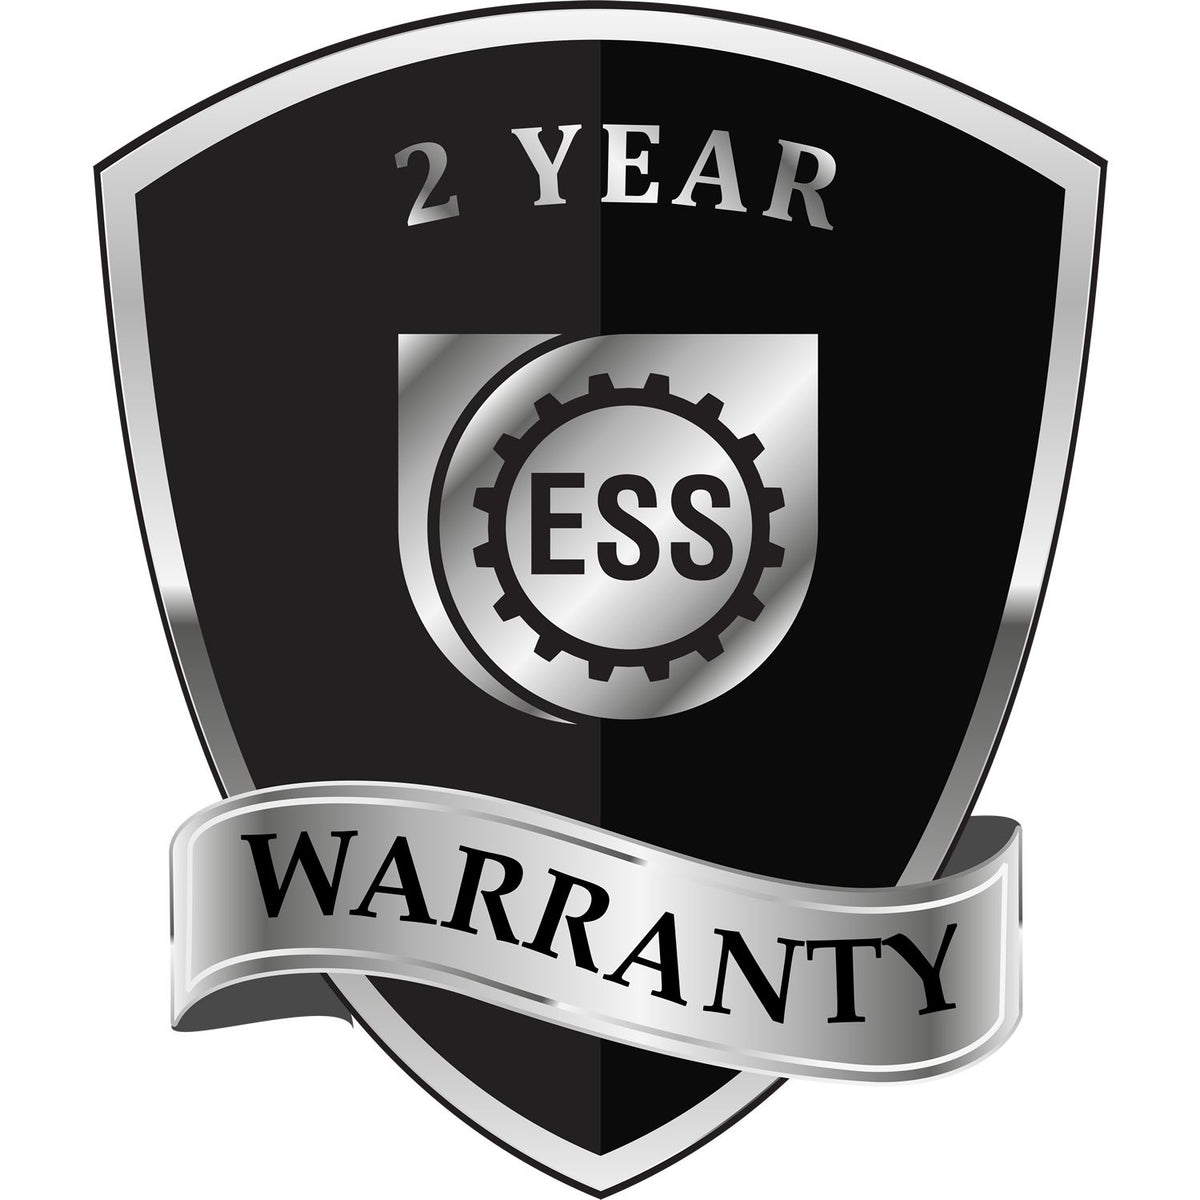 A black and silver badge or emblem showing warranty information for the Connecticut Geologist Desk Seal